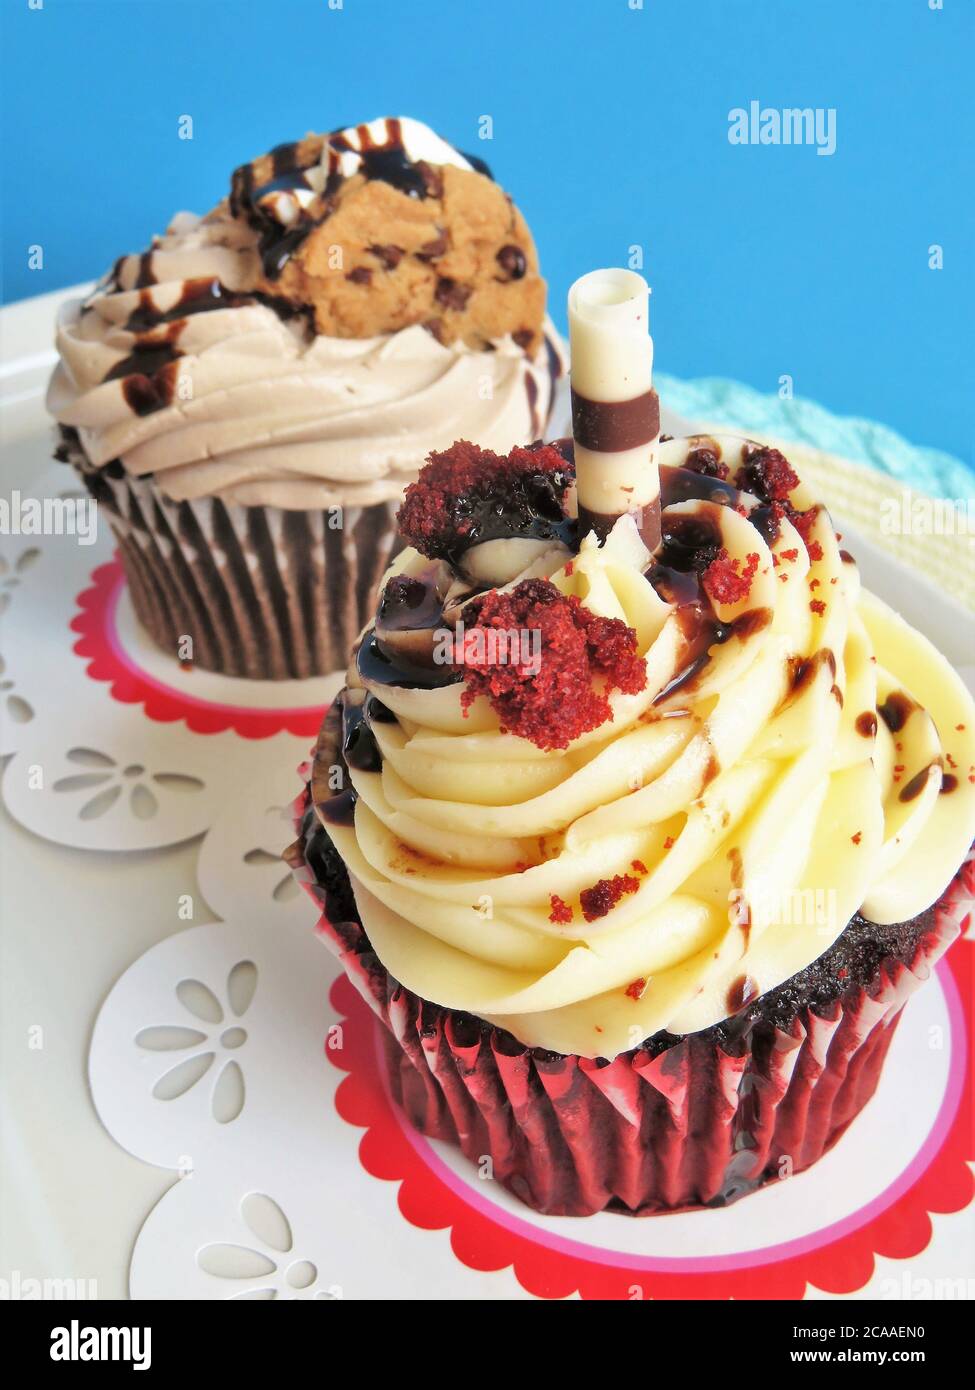 Chocolate cupcake and a red velvet cupcake with frosting Stock Photo